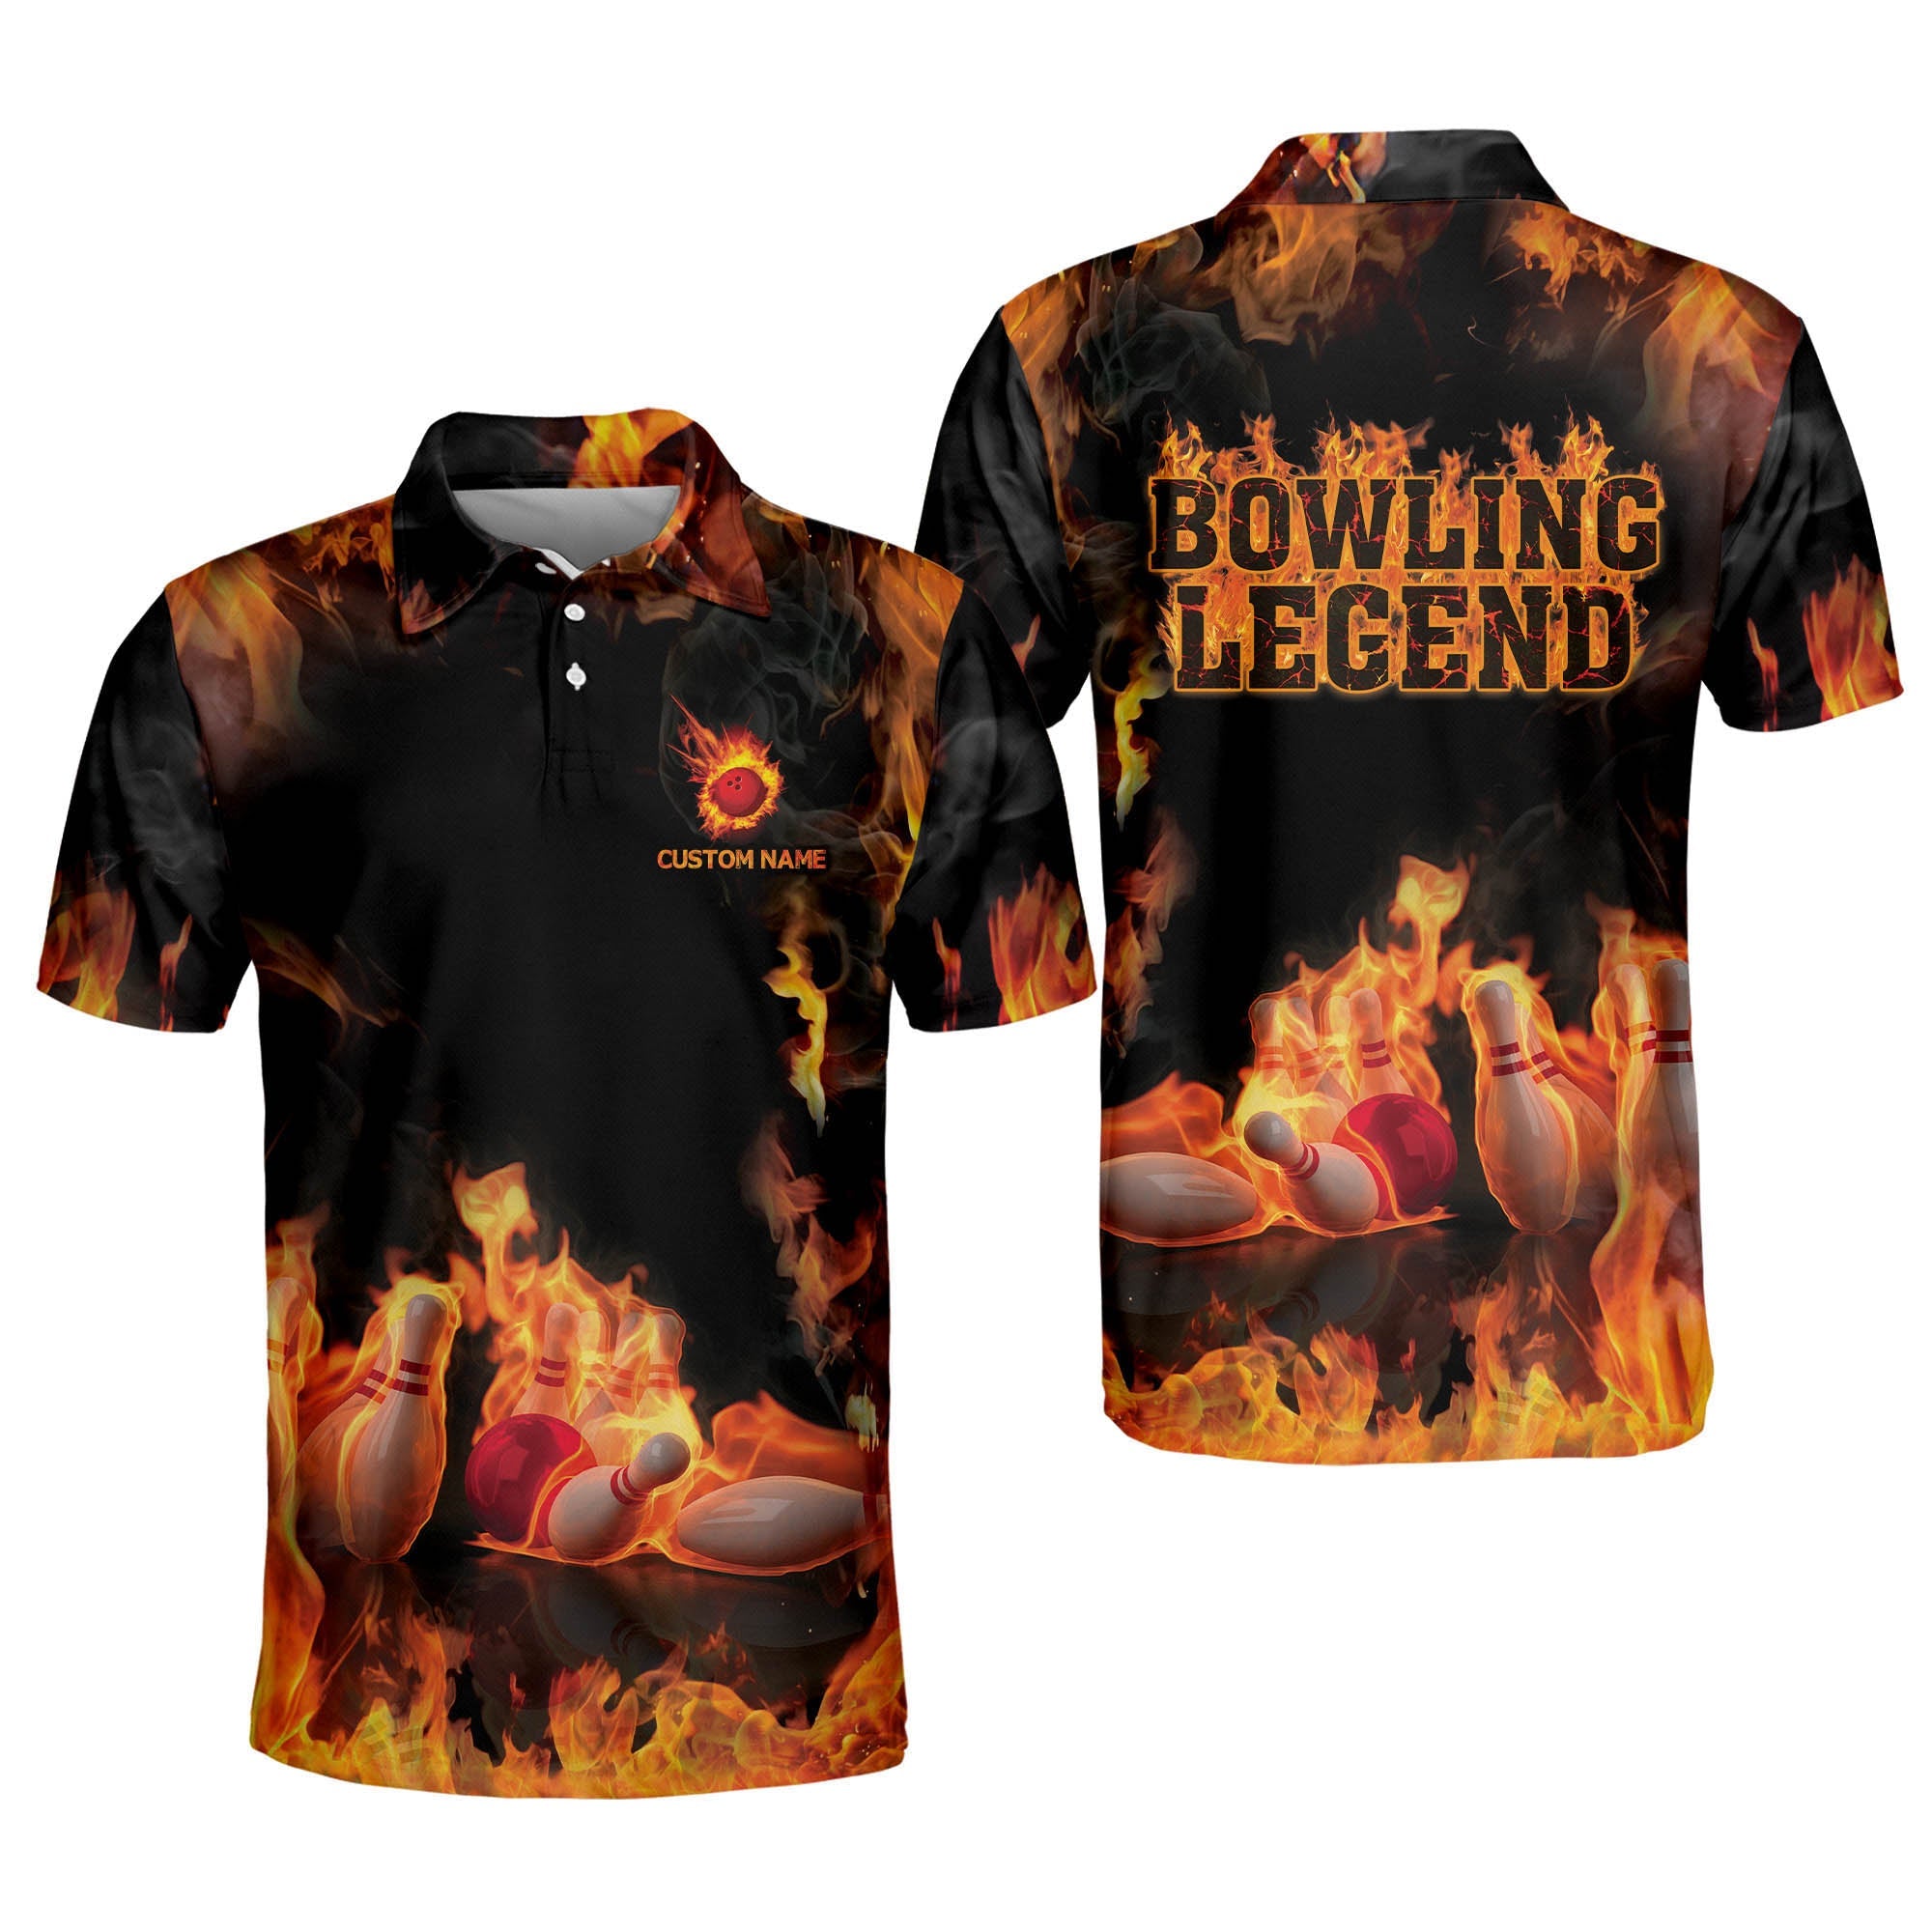 Lasfour Personalized Flame Bowling Shirts For Men, Bowling Legend ...